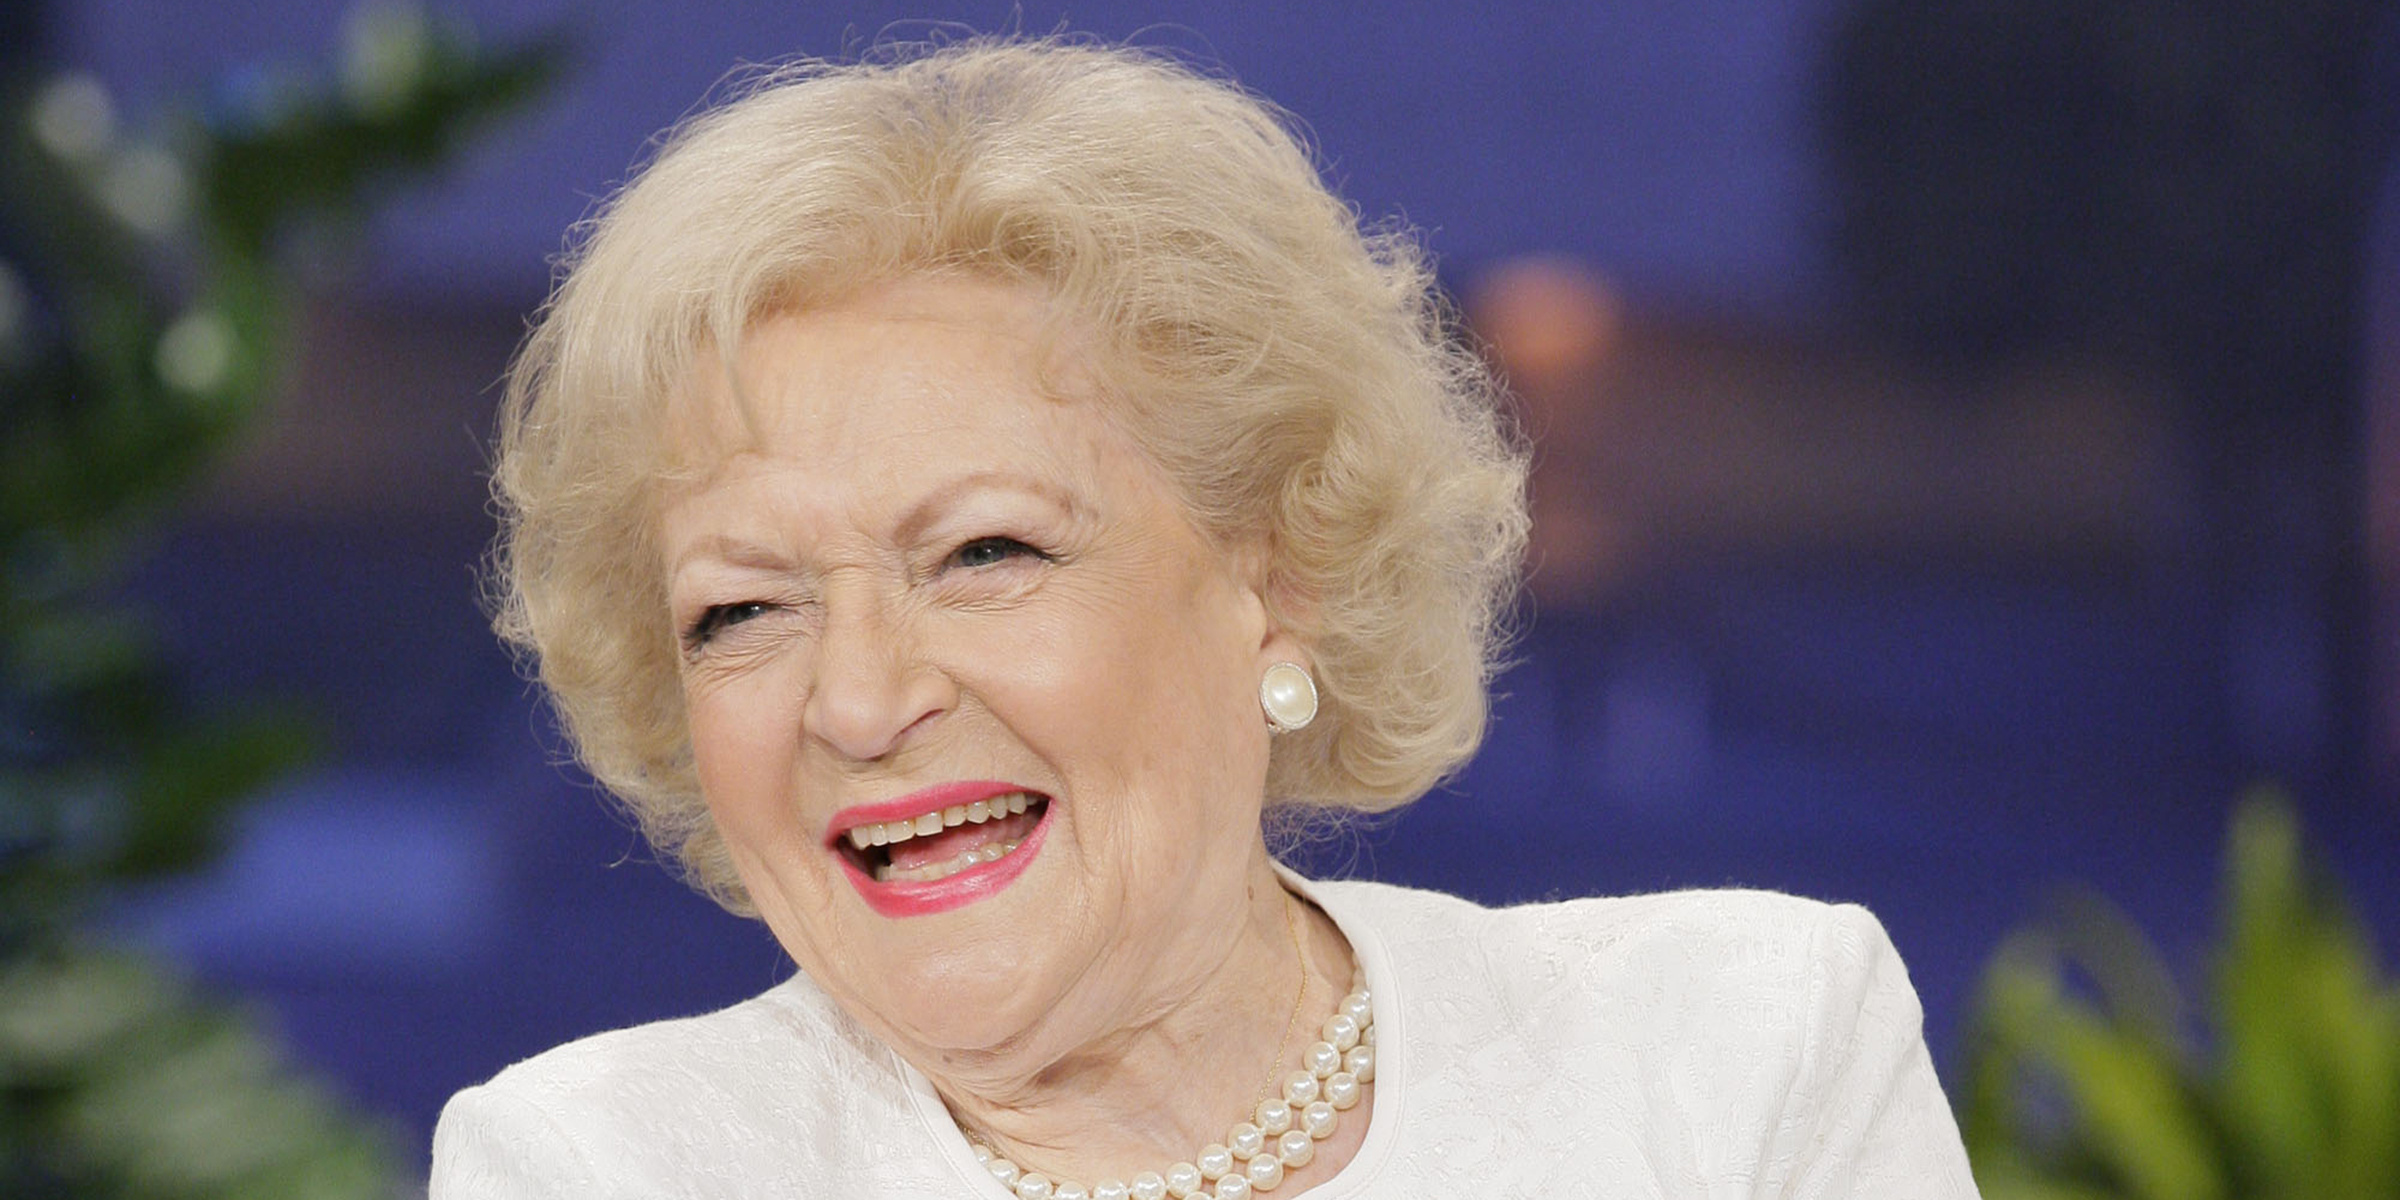 Betty White, Movies, Assistant shares, Last photos, 2400x1200 Dual Screen Desktop